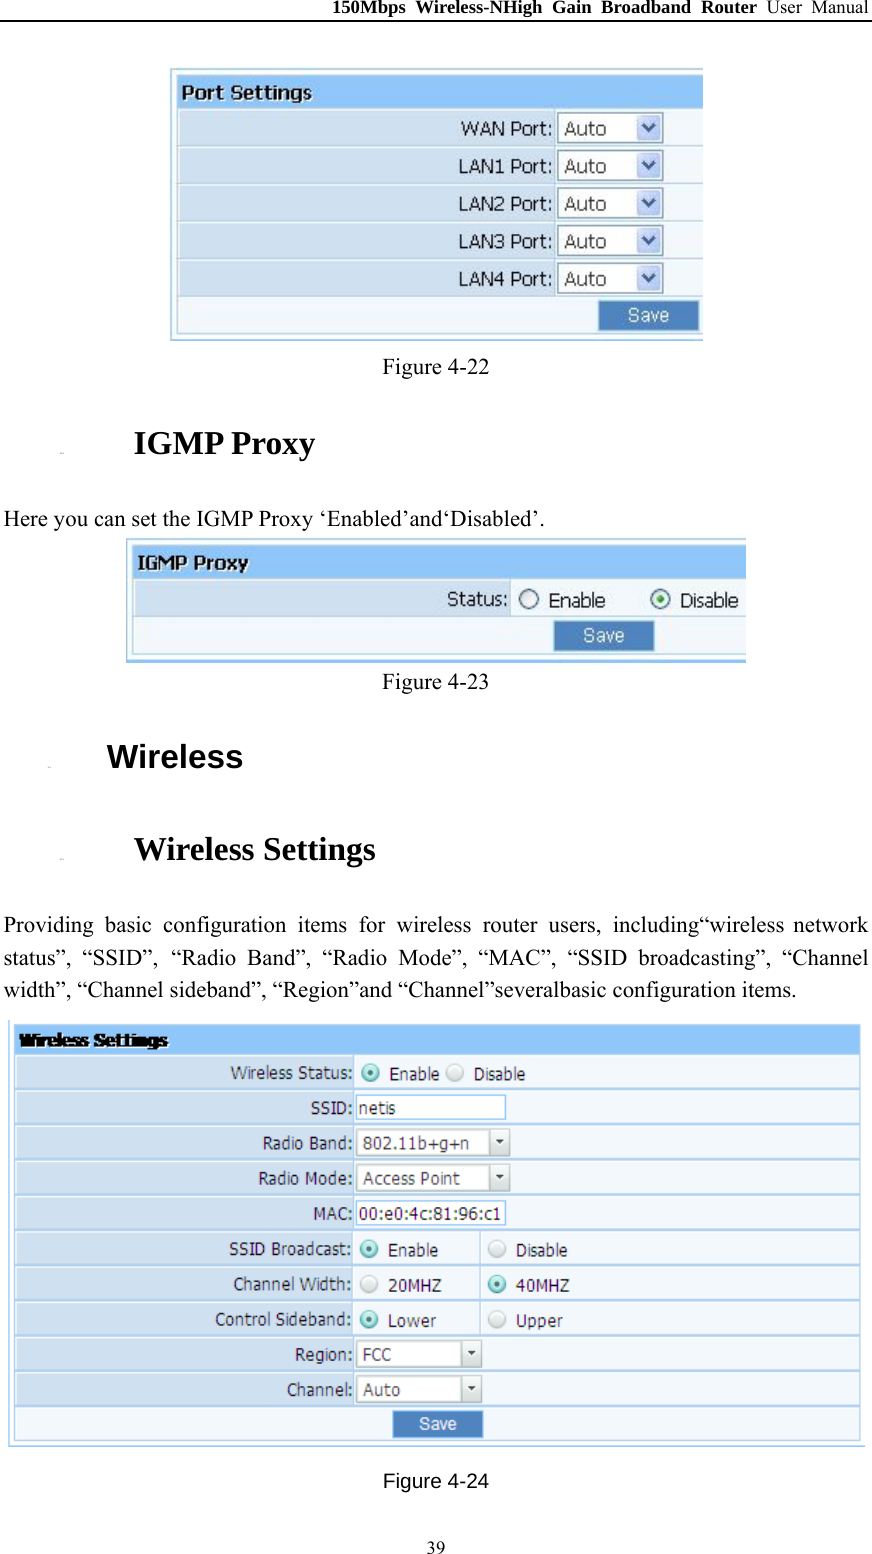 150Mbps Wireless-NHigh Gain Broadband Router User Manual  Figure 4-22 4.4.5. IGMP Proxy Here you can set the IGMP Proxy ‘Enabled’and‘Disabled’.  Figure 4-23 4.5. Wireless 4.5.1. Wireless Settings Providing basic configuration items for wireless router users, including“wireless network status”, “SSID”, “Radio Band”, “Radio Mode”, “MAC”, “SSID broadcasting”, “Channel width”, “Channel sideband”, “Region”and “Channel”severalbasic configuration items.  Figure 4-24  39